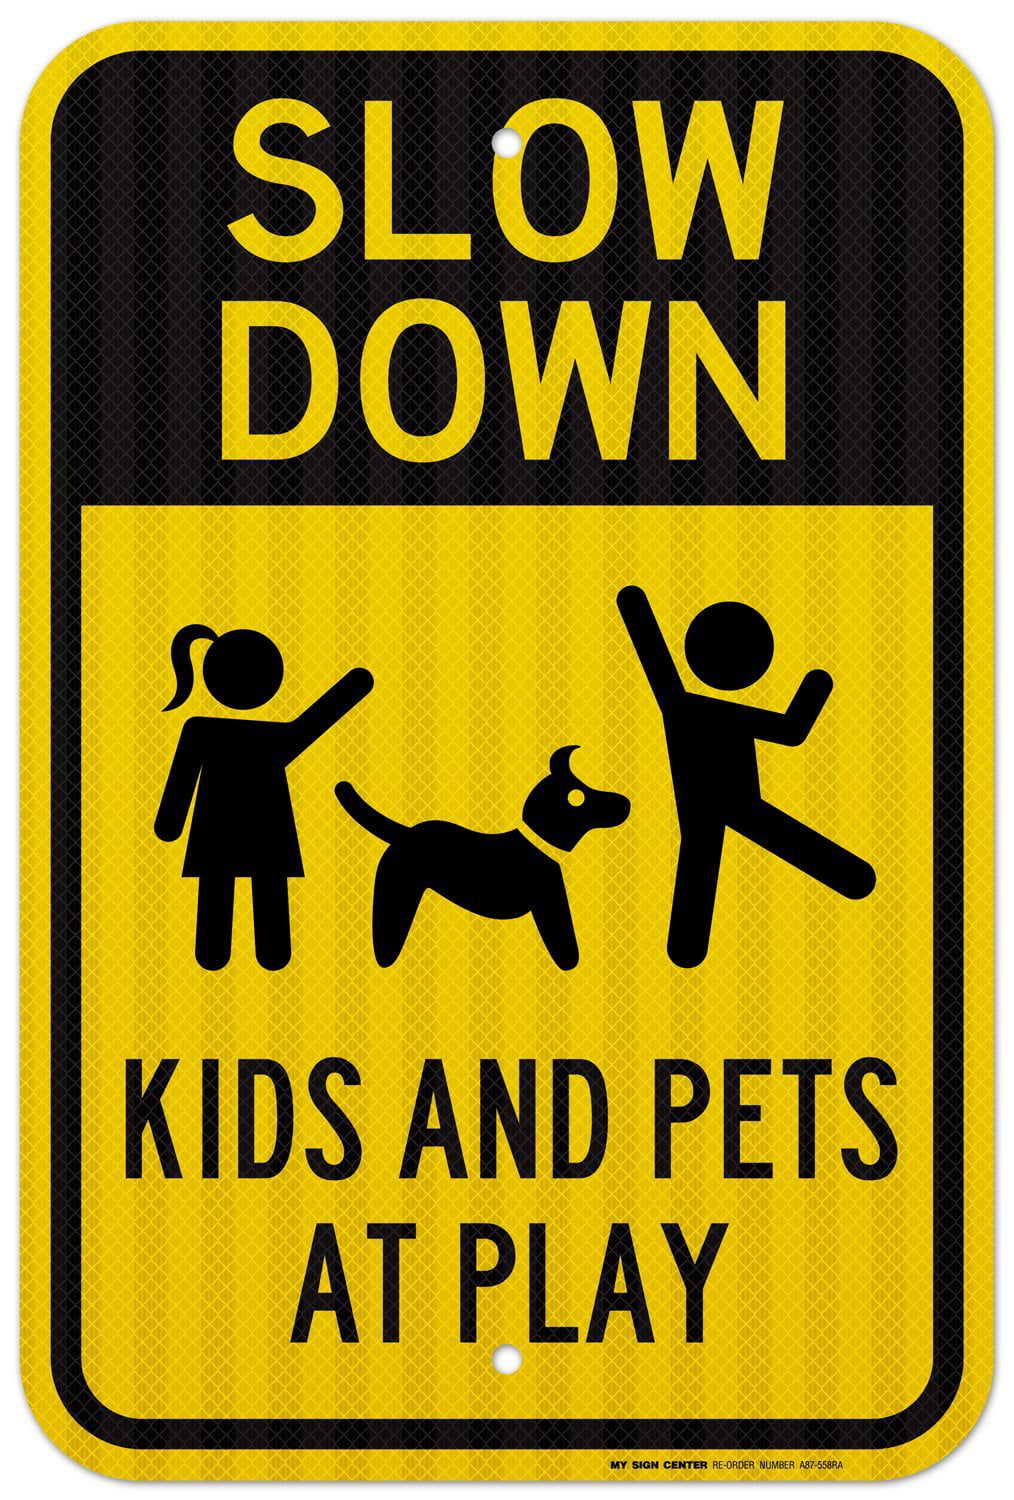 Made in USA by SIGO SIGNS SI-796 Rust Free,63 Aluminum Slow Down Sign Easy to Mount Weather Resistant Long Lasting Ink EGP 12x18 3M Reflective Children and Pets at Play Sign 